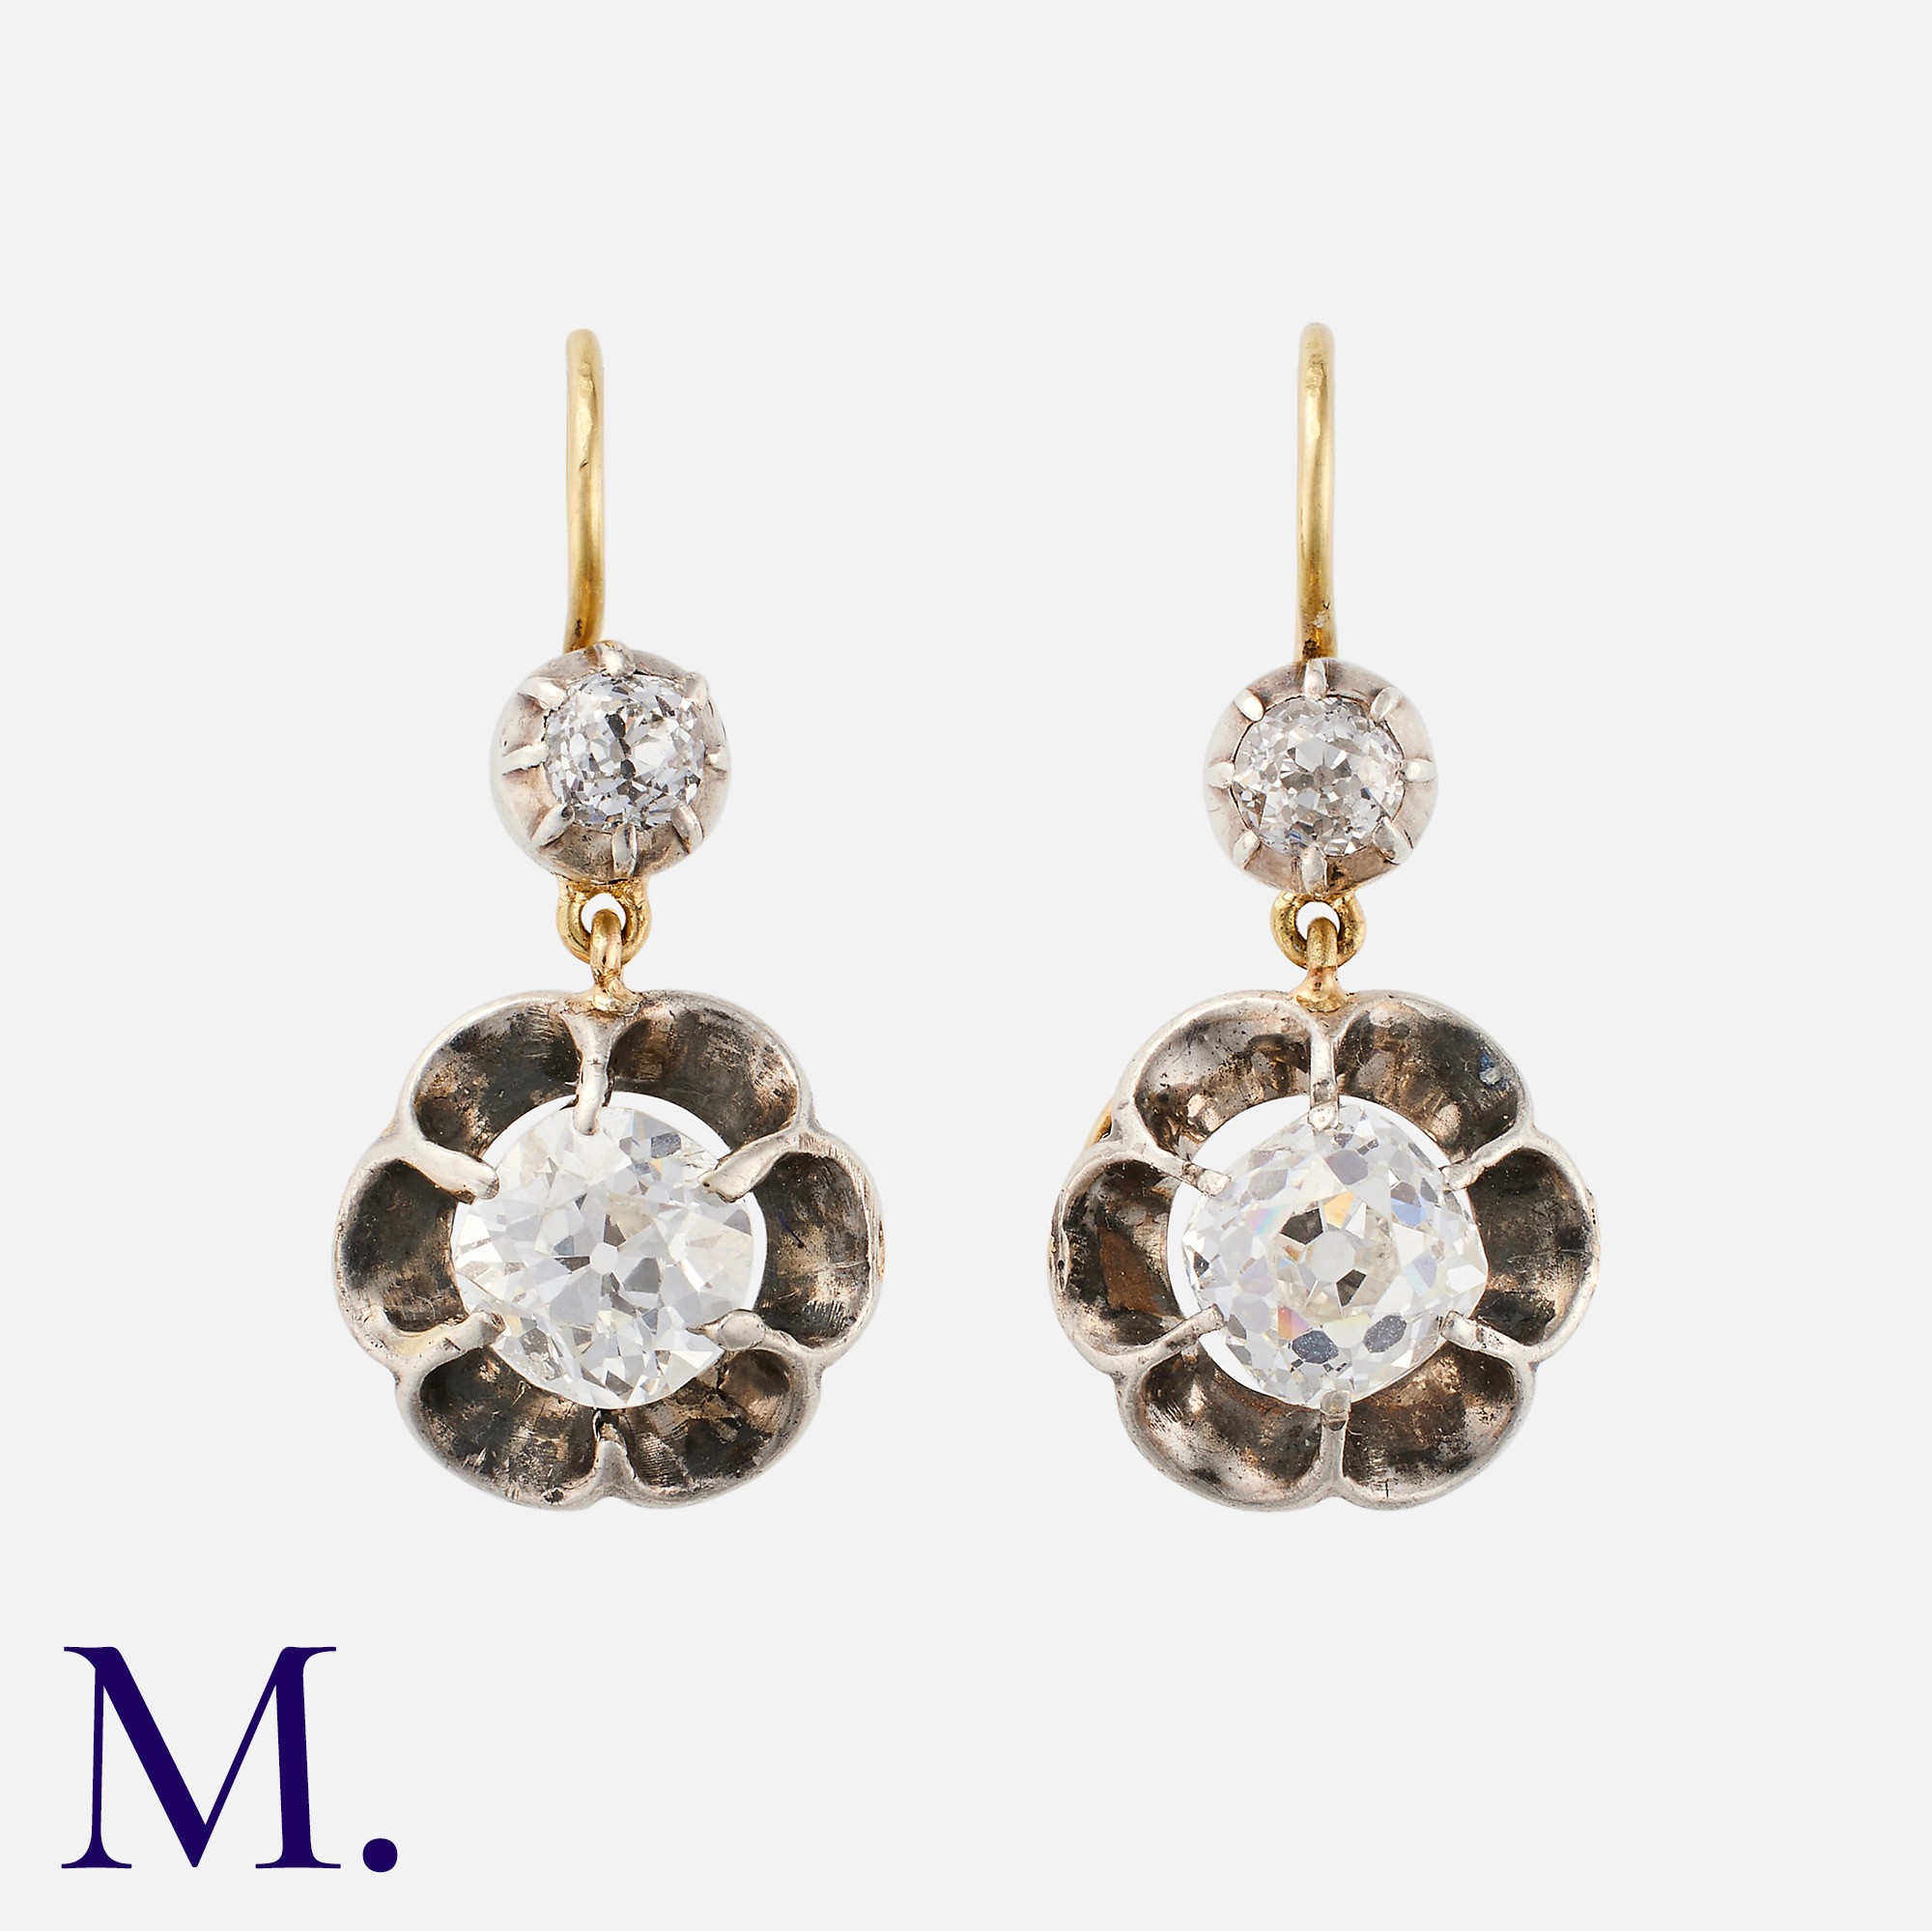 A Pair Of Antique Old Cut Diamond Earrings in 18k yellow gold and silver, each comprising a